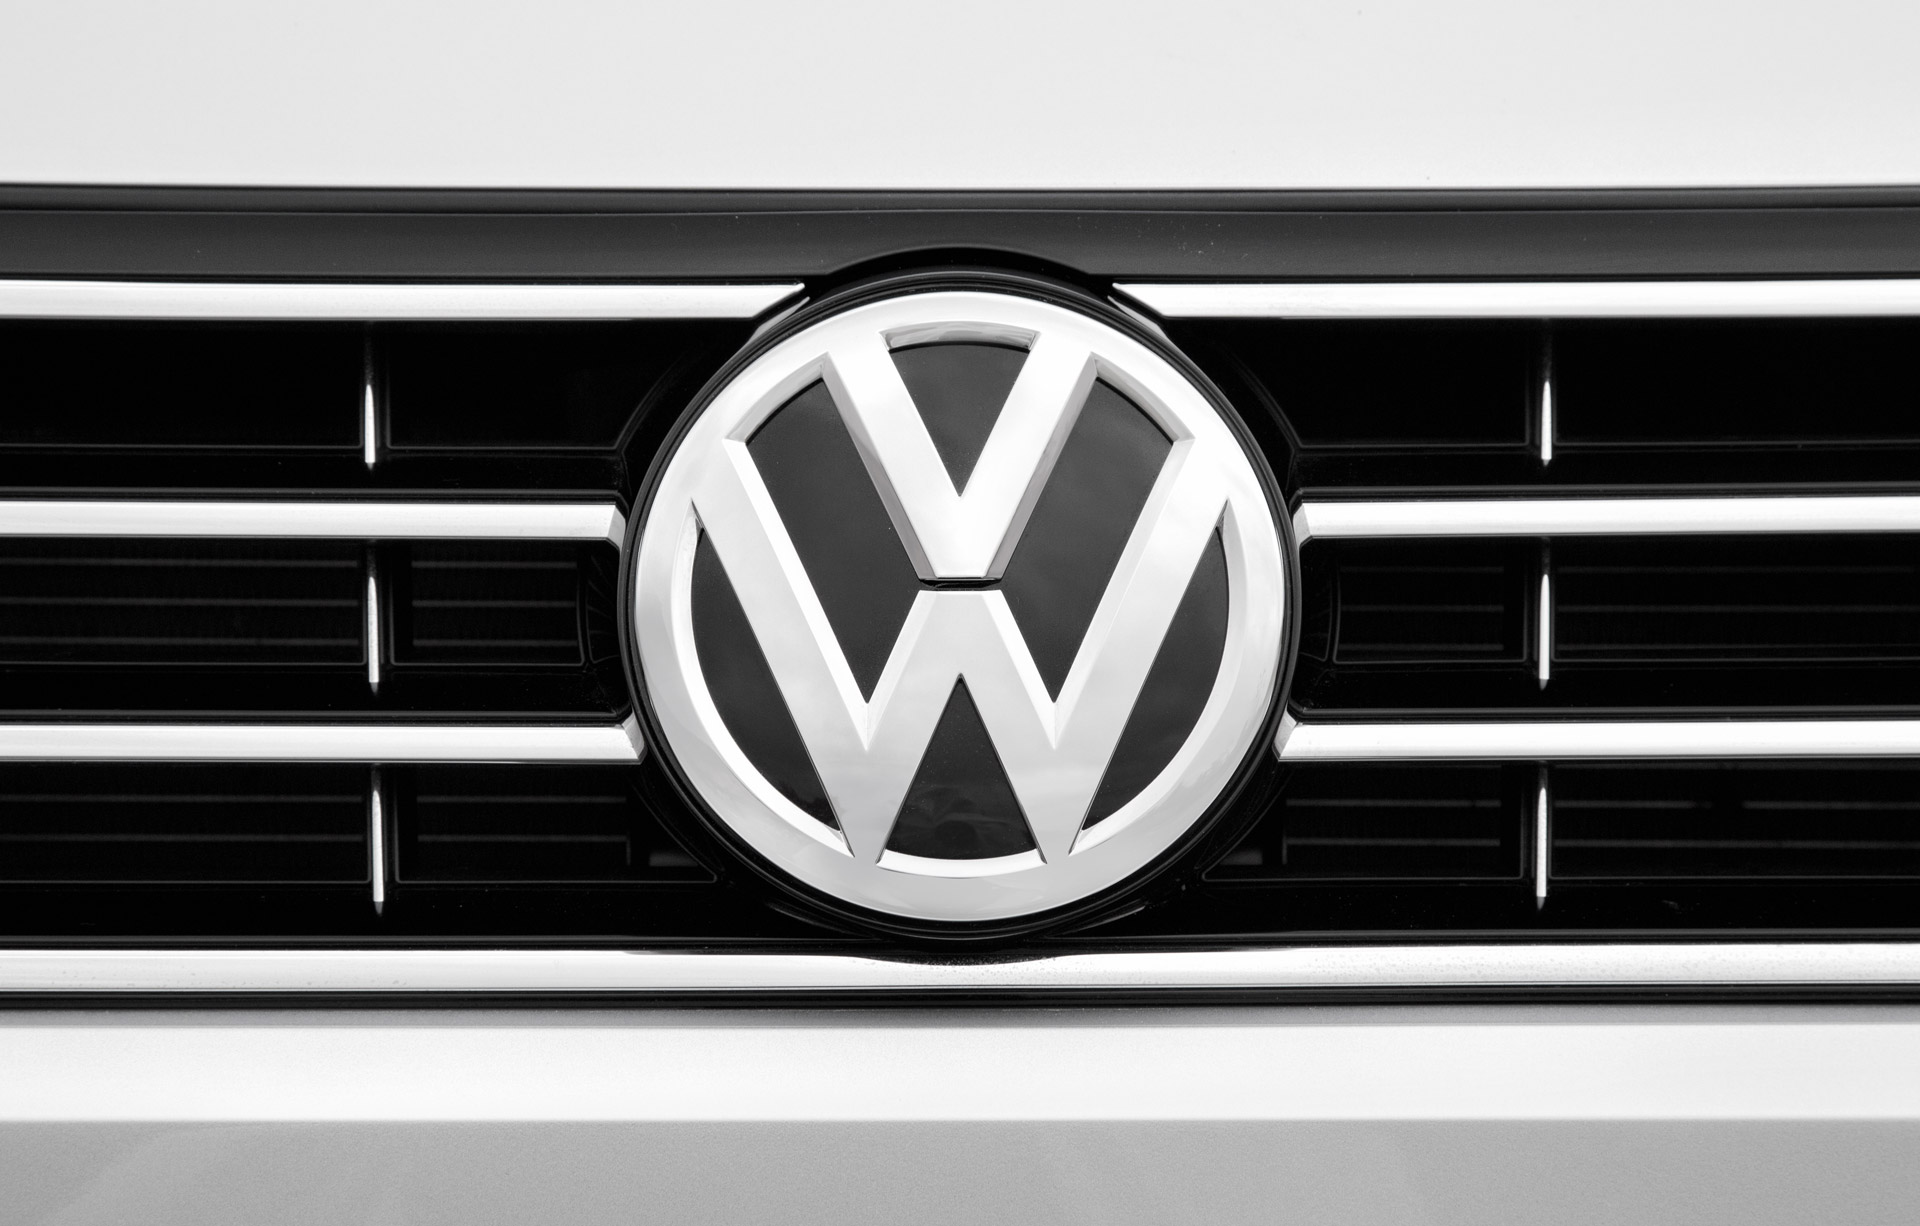 Volkswagen Dieselgate update: Audi made defeat device in 1999, scandal-related costs ...